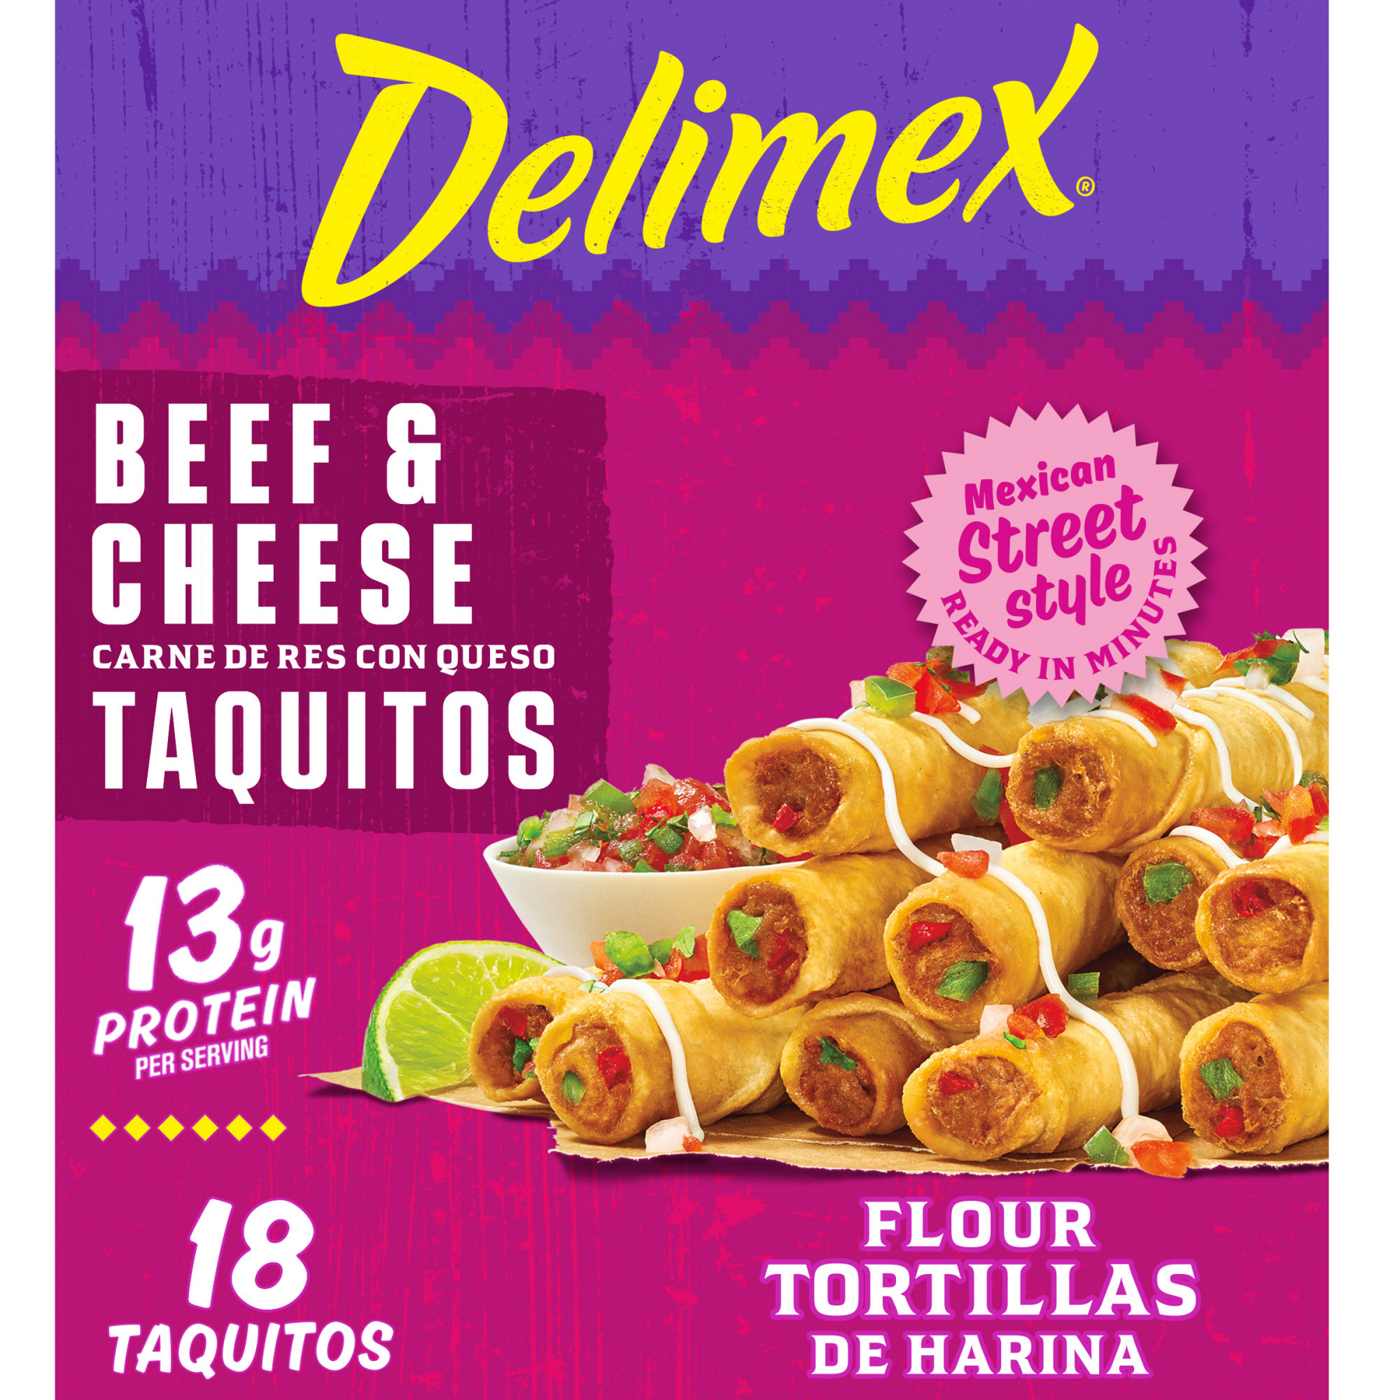 Delimex Beef & Cheese Flour Taquitos; image 1 of 9